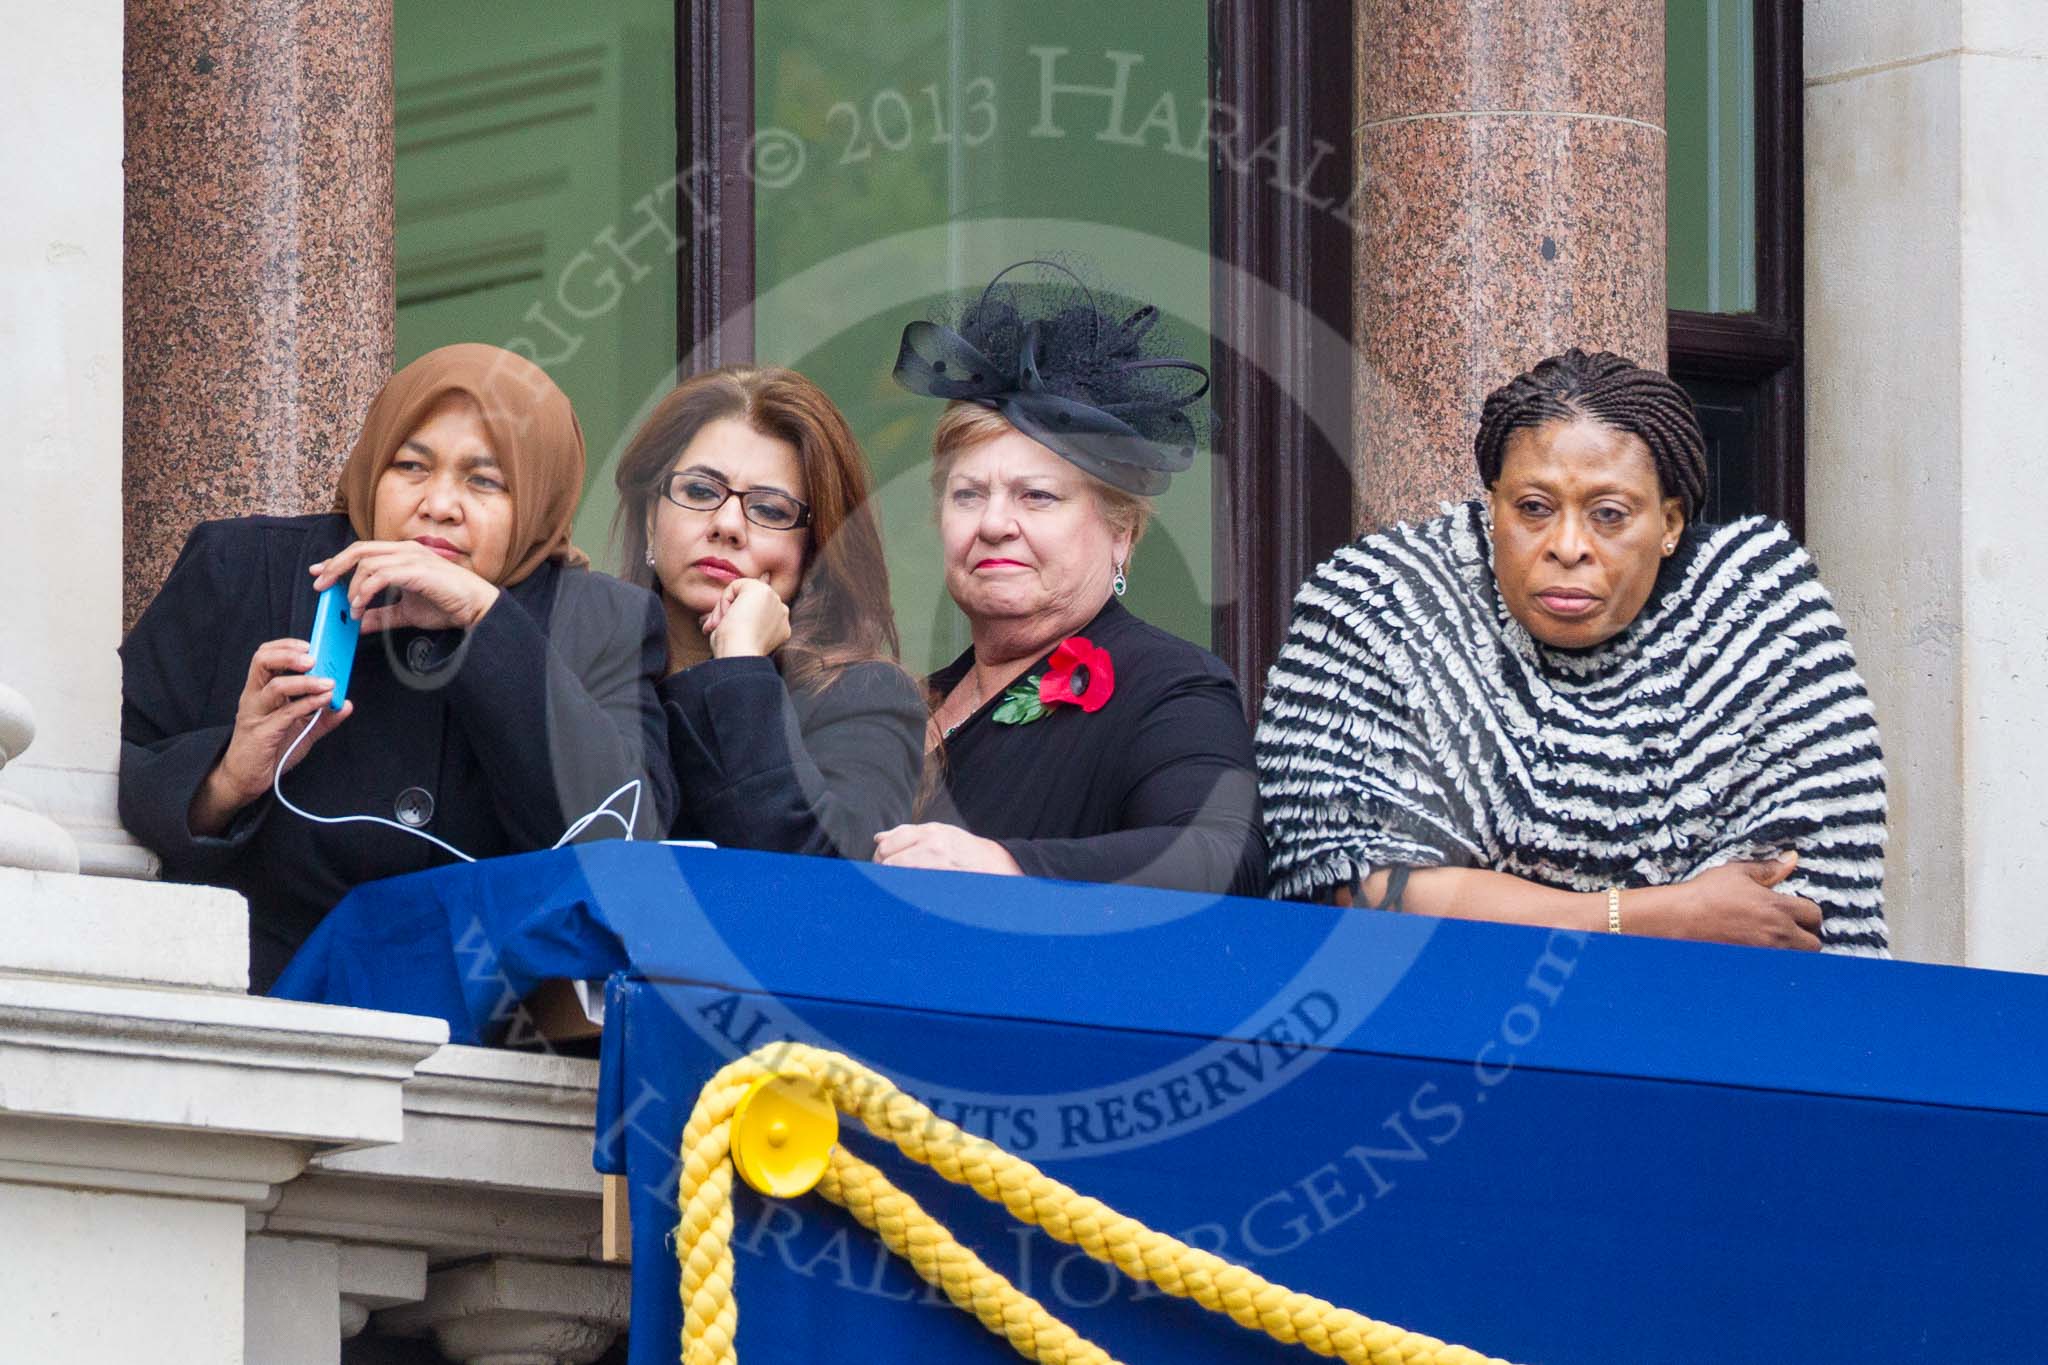 Remembrance Sunday at the Cenotaph 2015: Guests watching the ceremony from one of the balconies of the Foreign- and Commonwealth Office. Image #262, 08 November 2015 11:12 Whitehall, London, UK